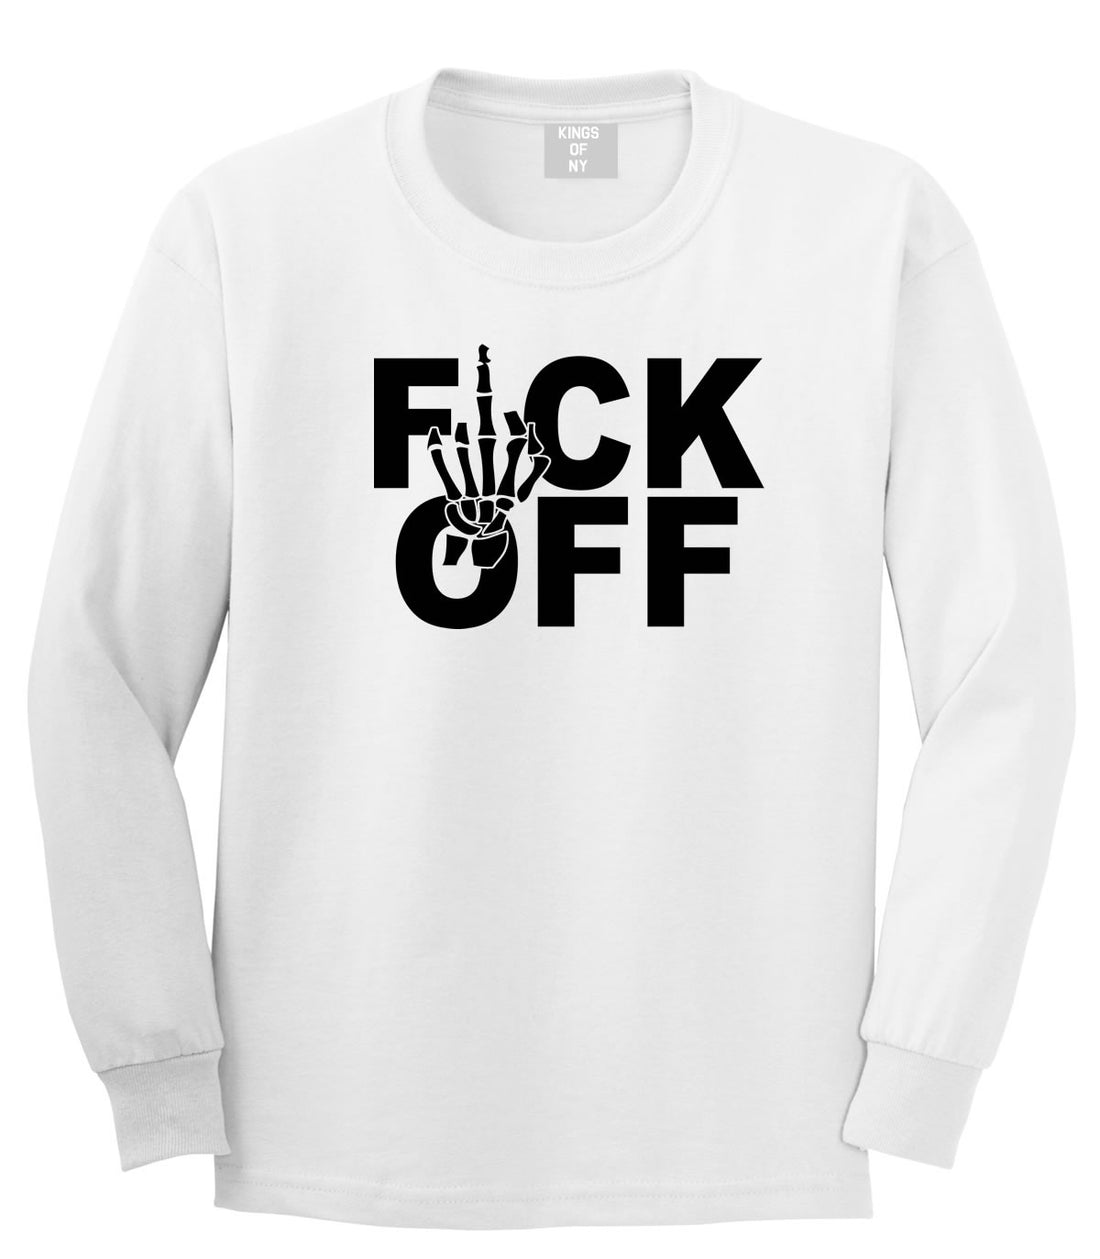 FCK OFF Skeleton Hand Long Sleeve T-Shirt in White by Kings Of NY